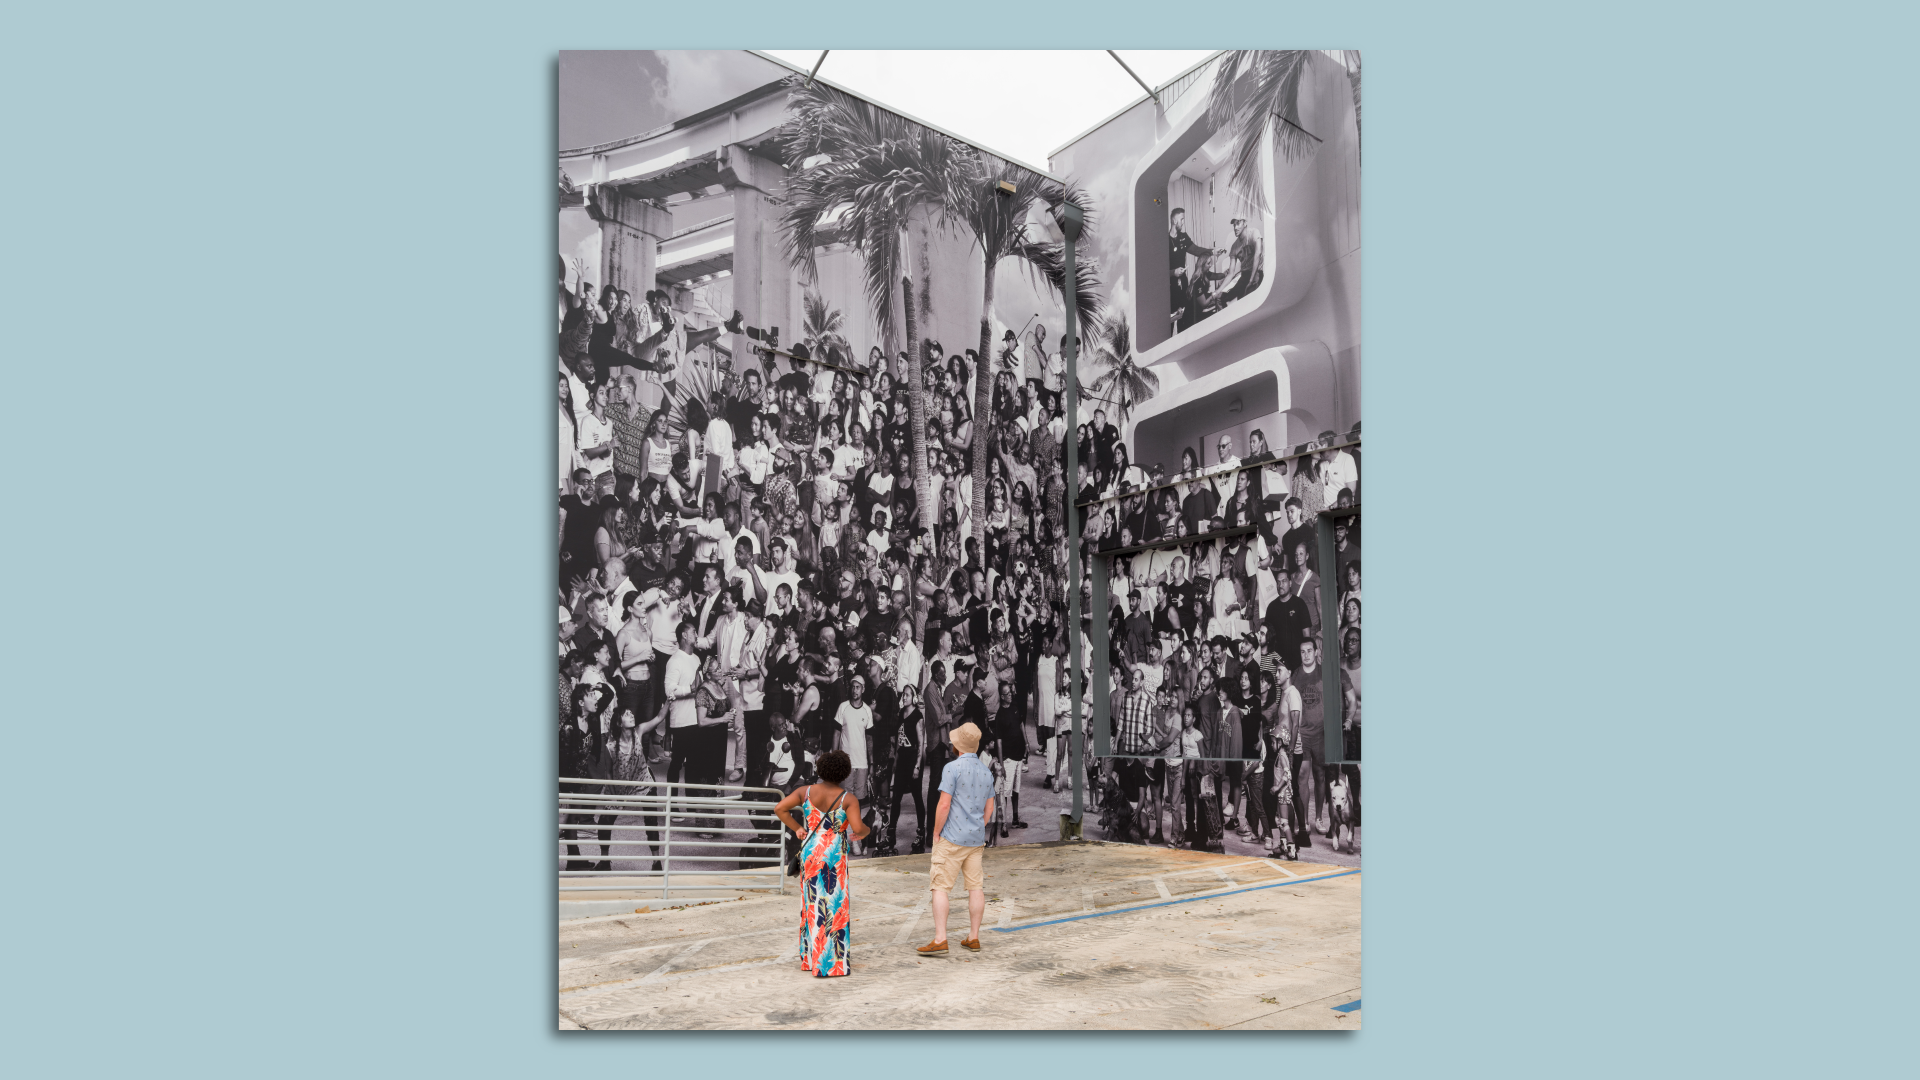 Two people look at a mural made up of over 1,000 Miami locals and celebrities.